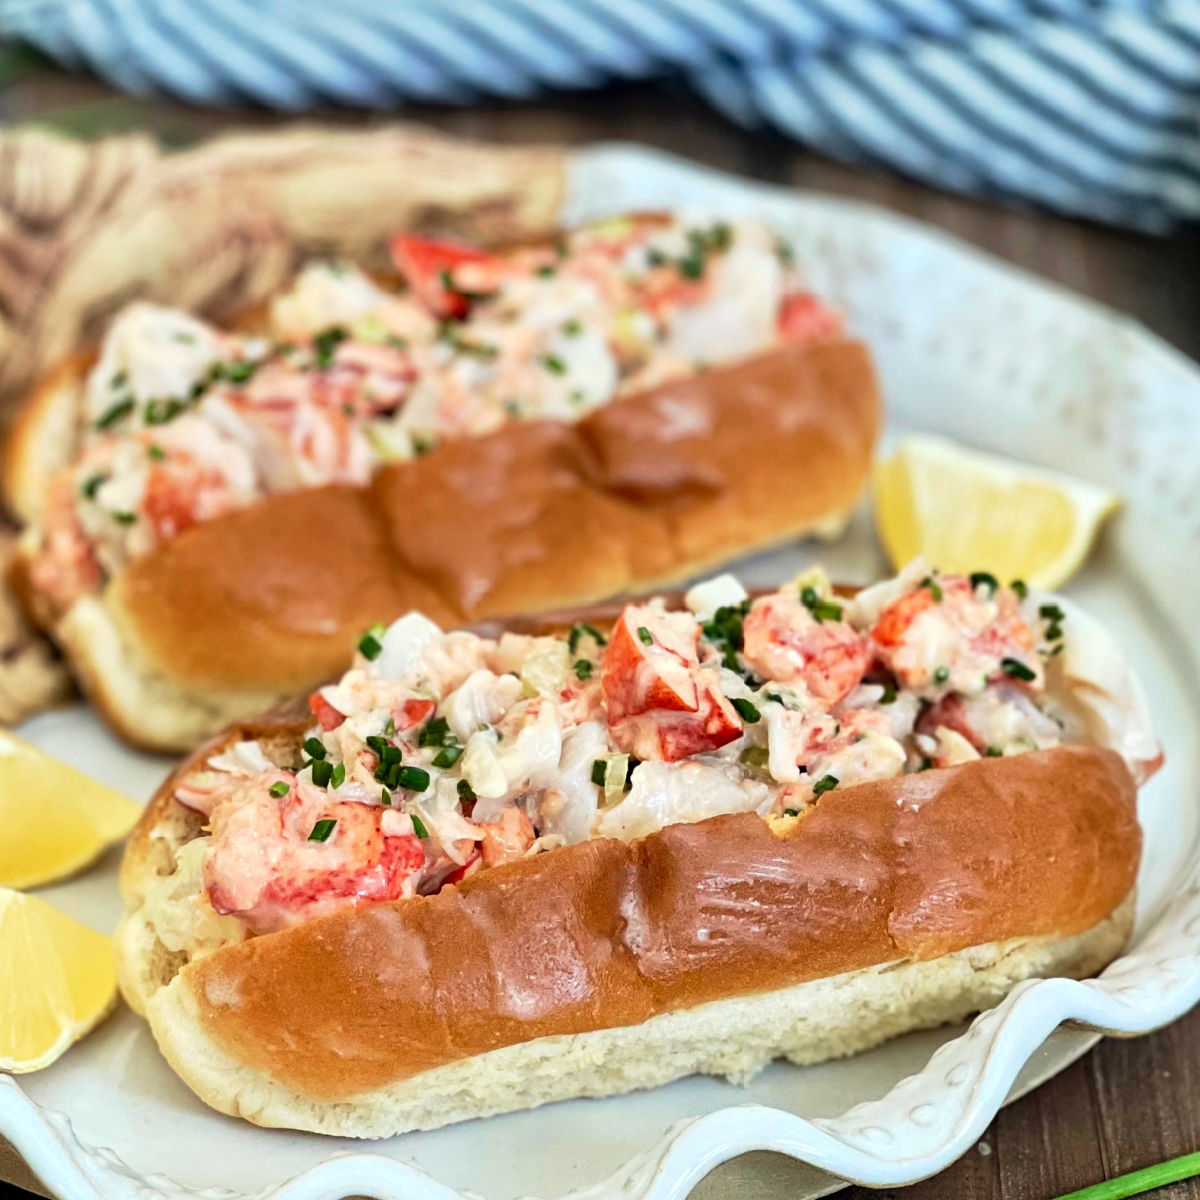 Two lobster rolls on a white plate with lemon wedges.